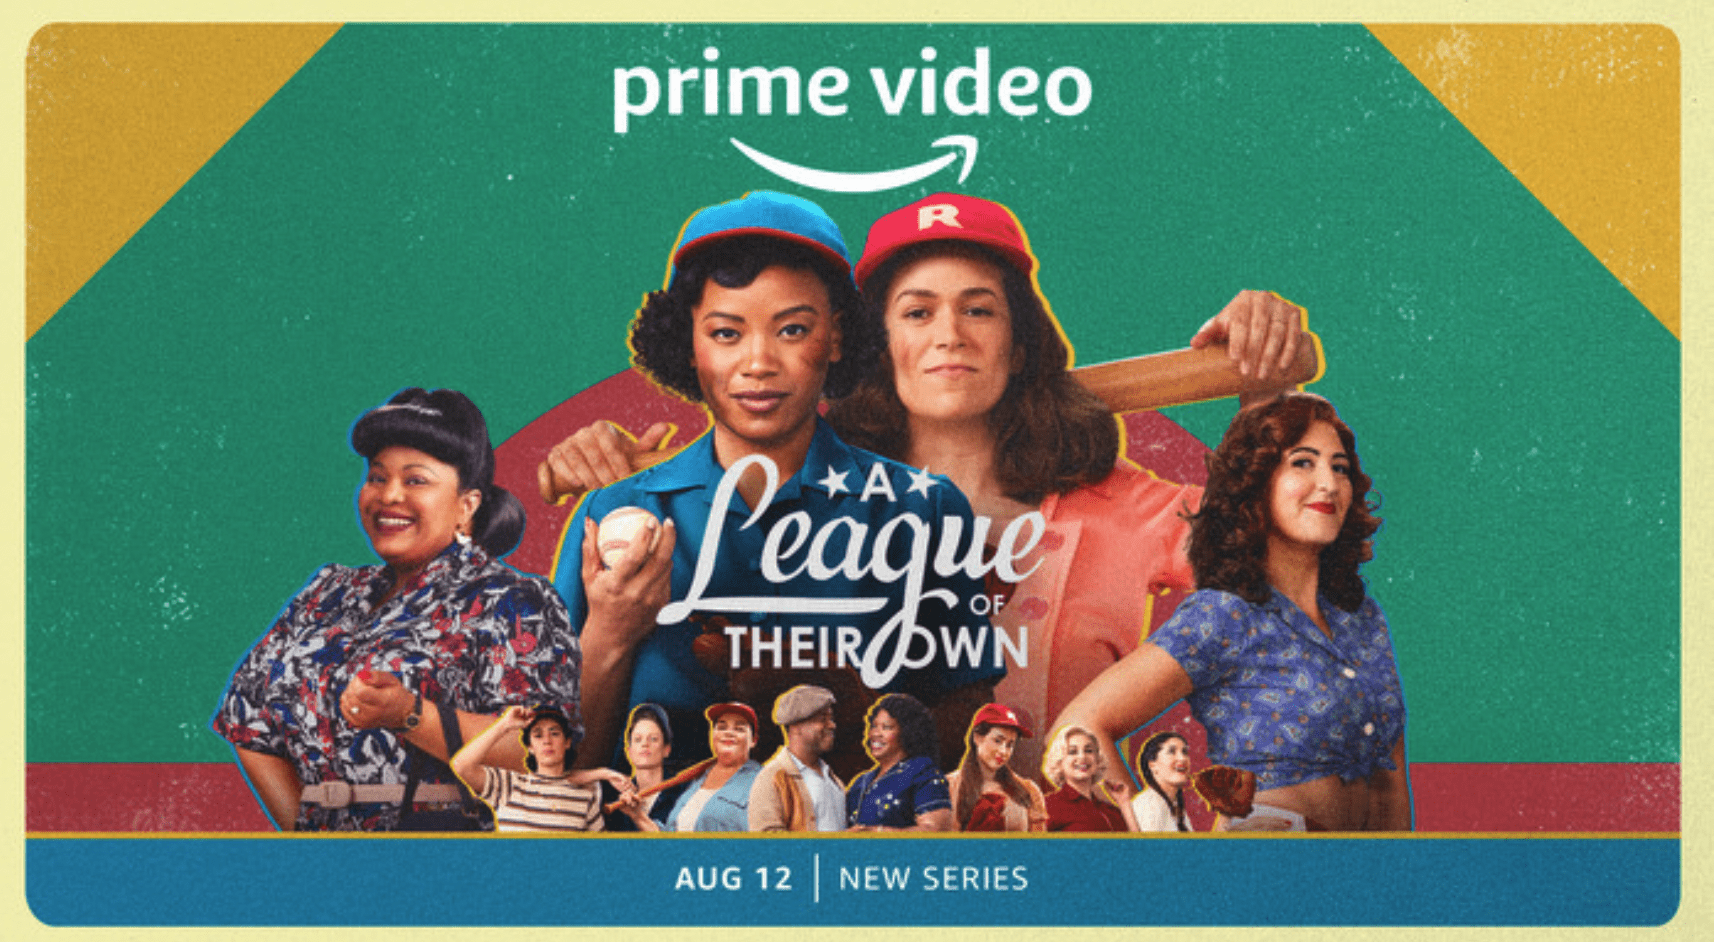 Now Streaming: Prime Video’s A League of Their Own Steps Up to the Plate. All eight episodes of the much anticipated series are available now on Prime Video.